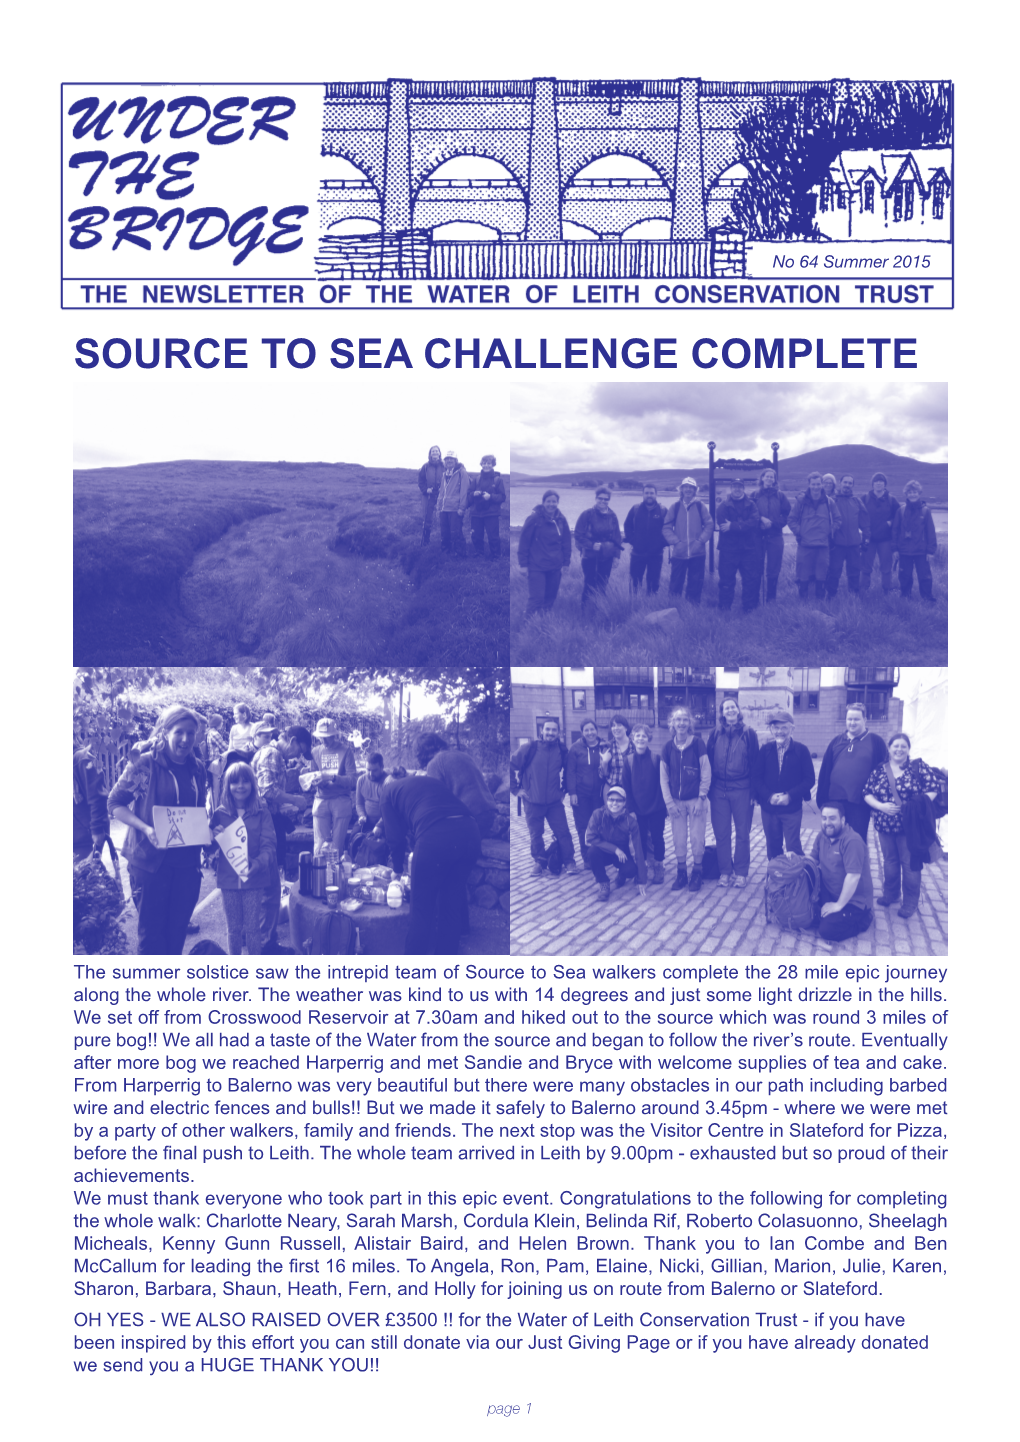 Source to Sea Challenge Complete